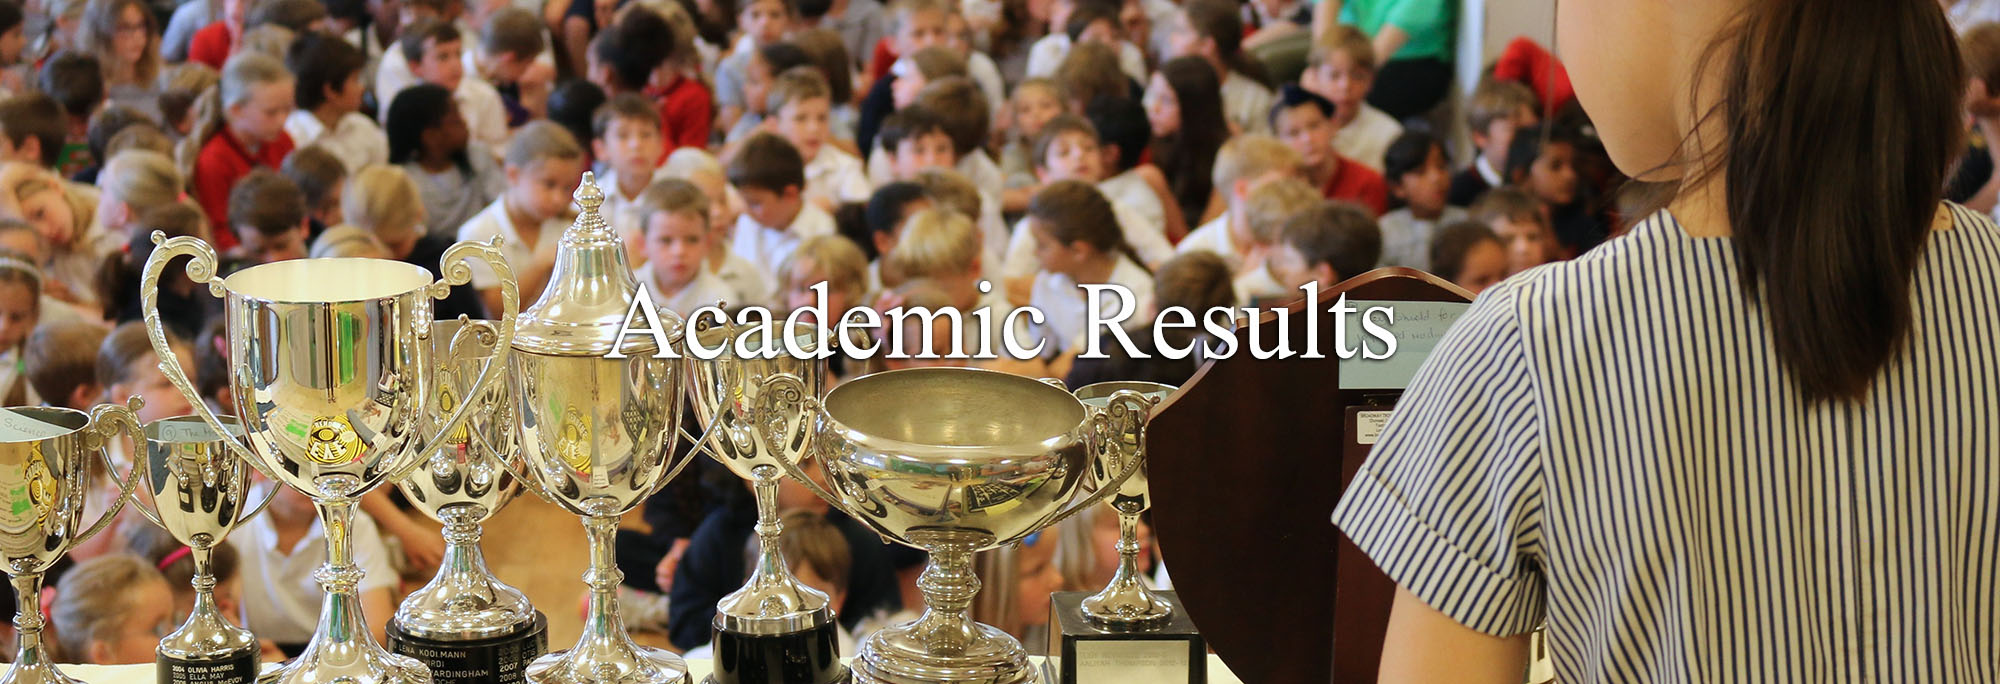 Academic-Results-Header